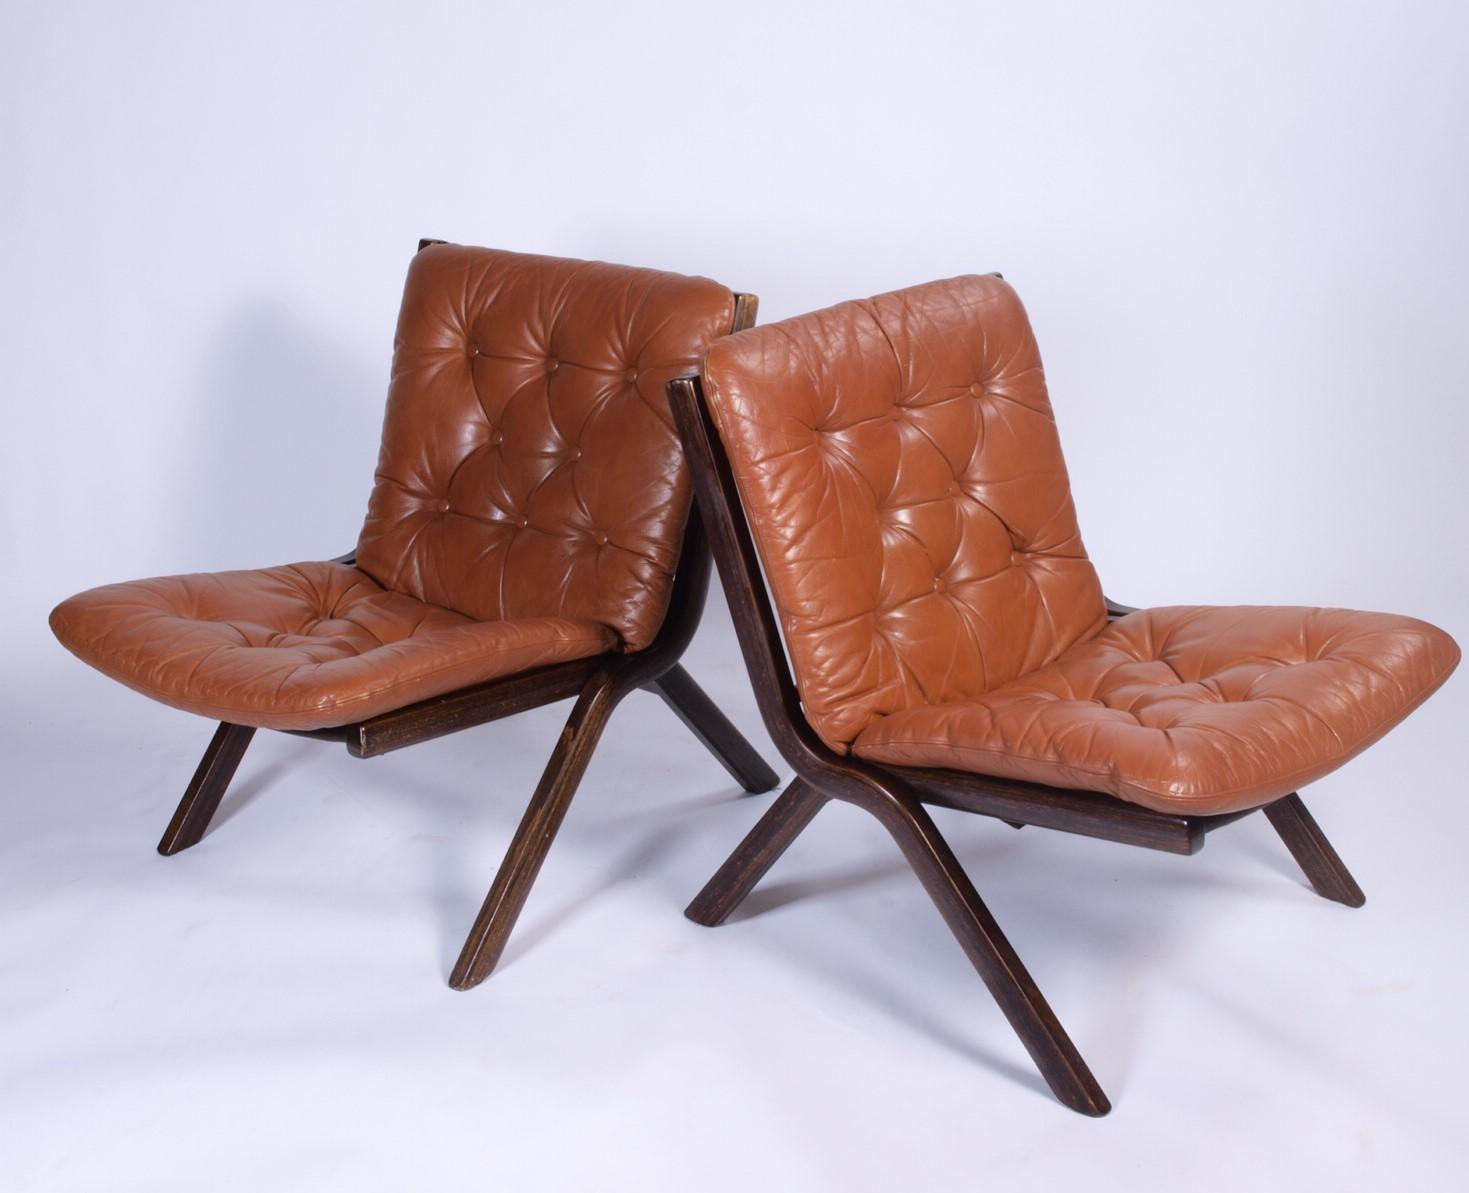 Crafted around 1970 in Norway, this vintage leather chair exudes timeless charm. Its curved, stained beechwood frame boasts a warm auburn tint, complementing the sumptuous caramel tan leather adorning the seat and back. The sinuous design, a